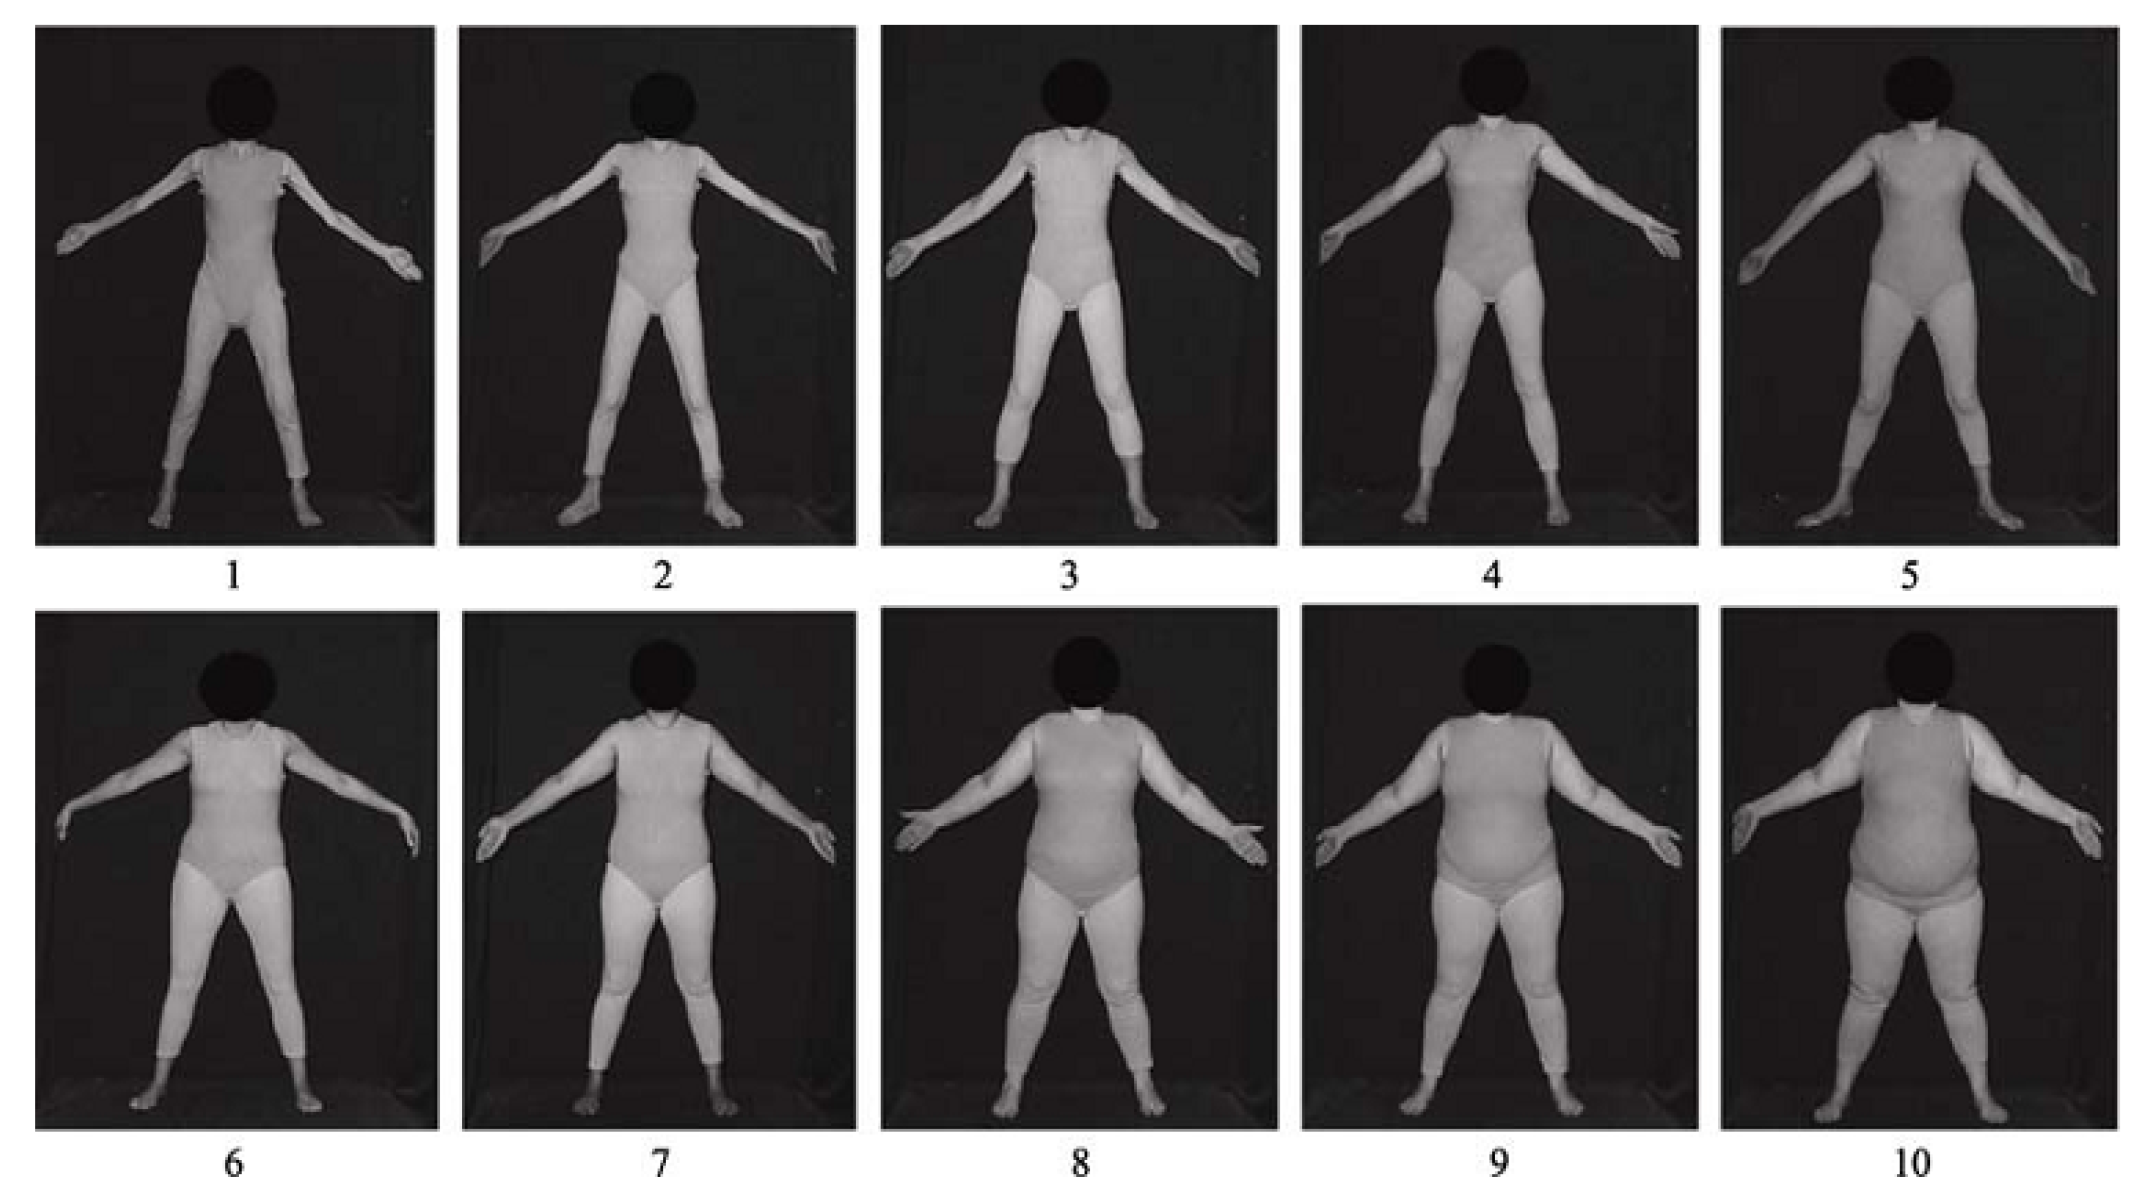 Stunkard's figure rating scale with corresponding mean body mass index